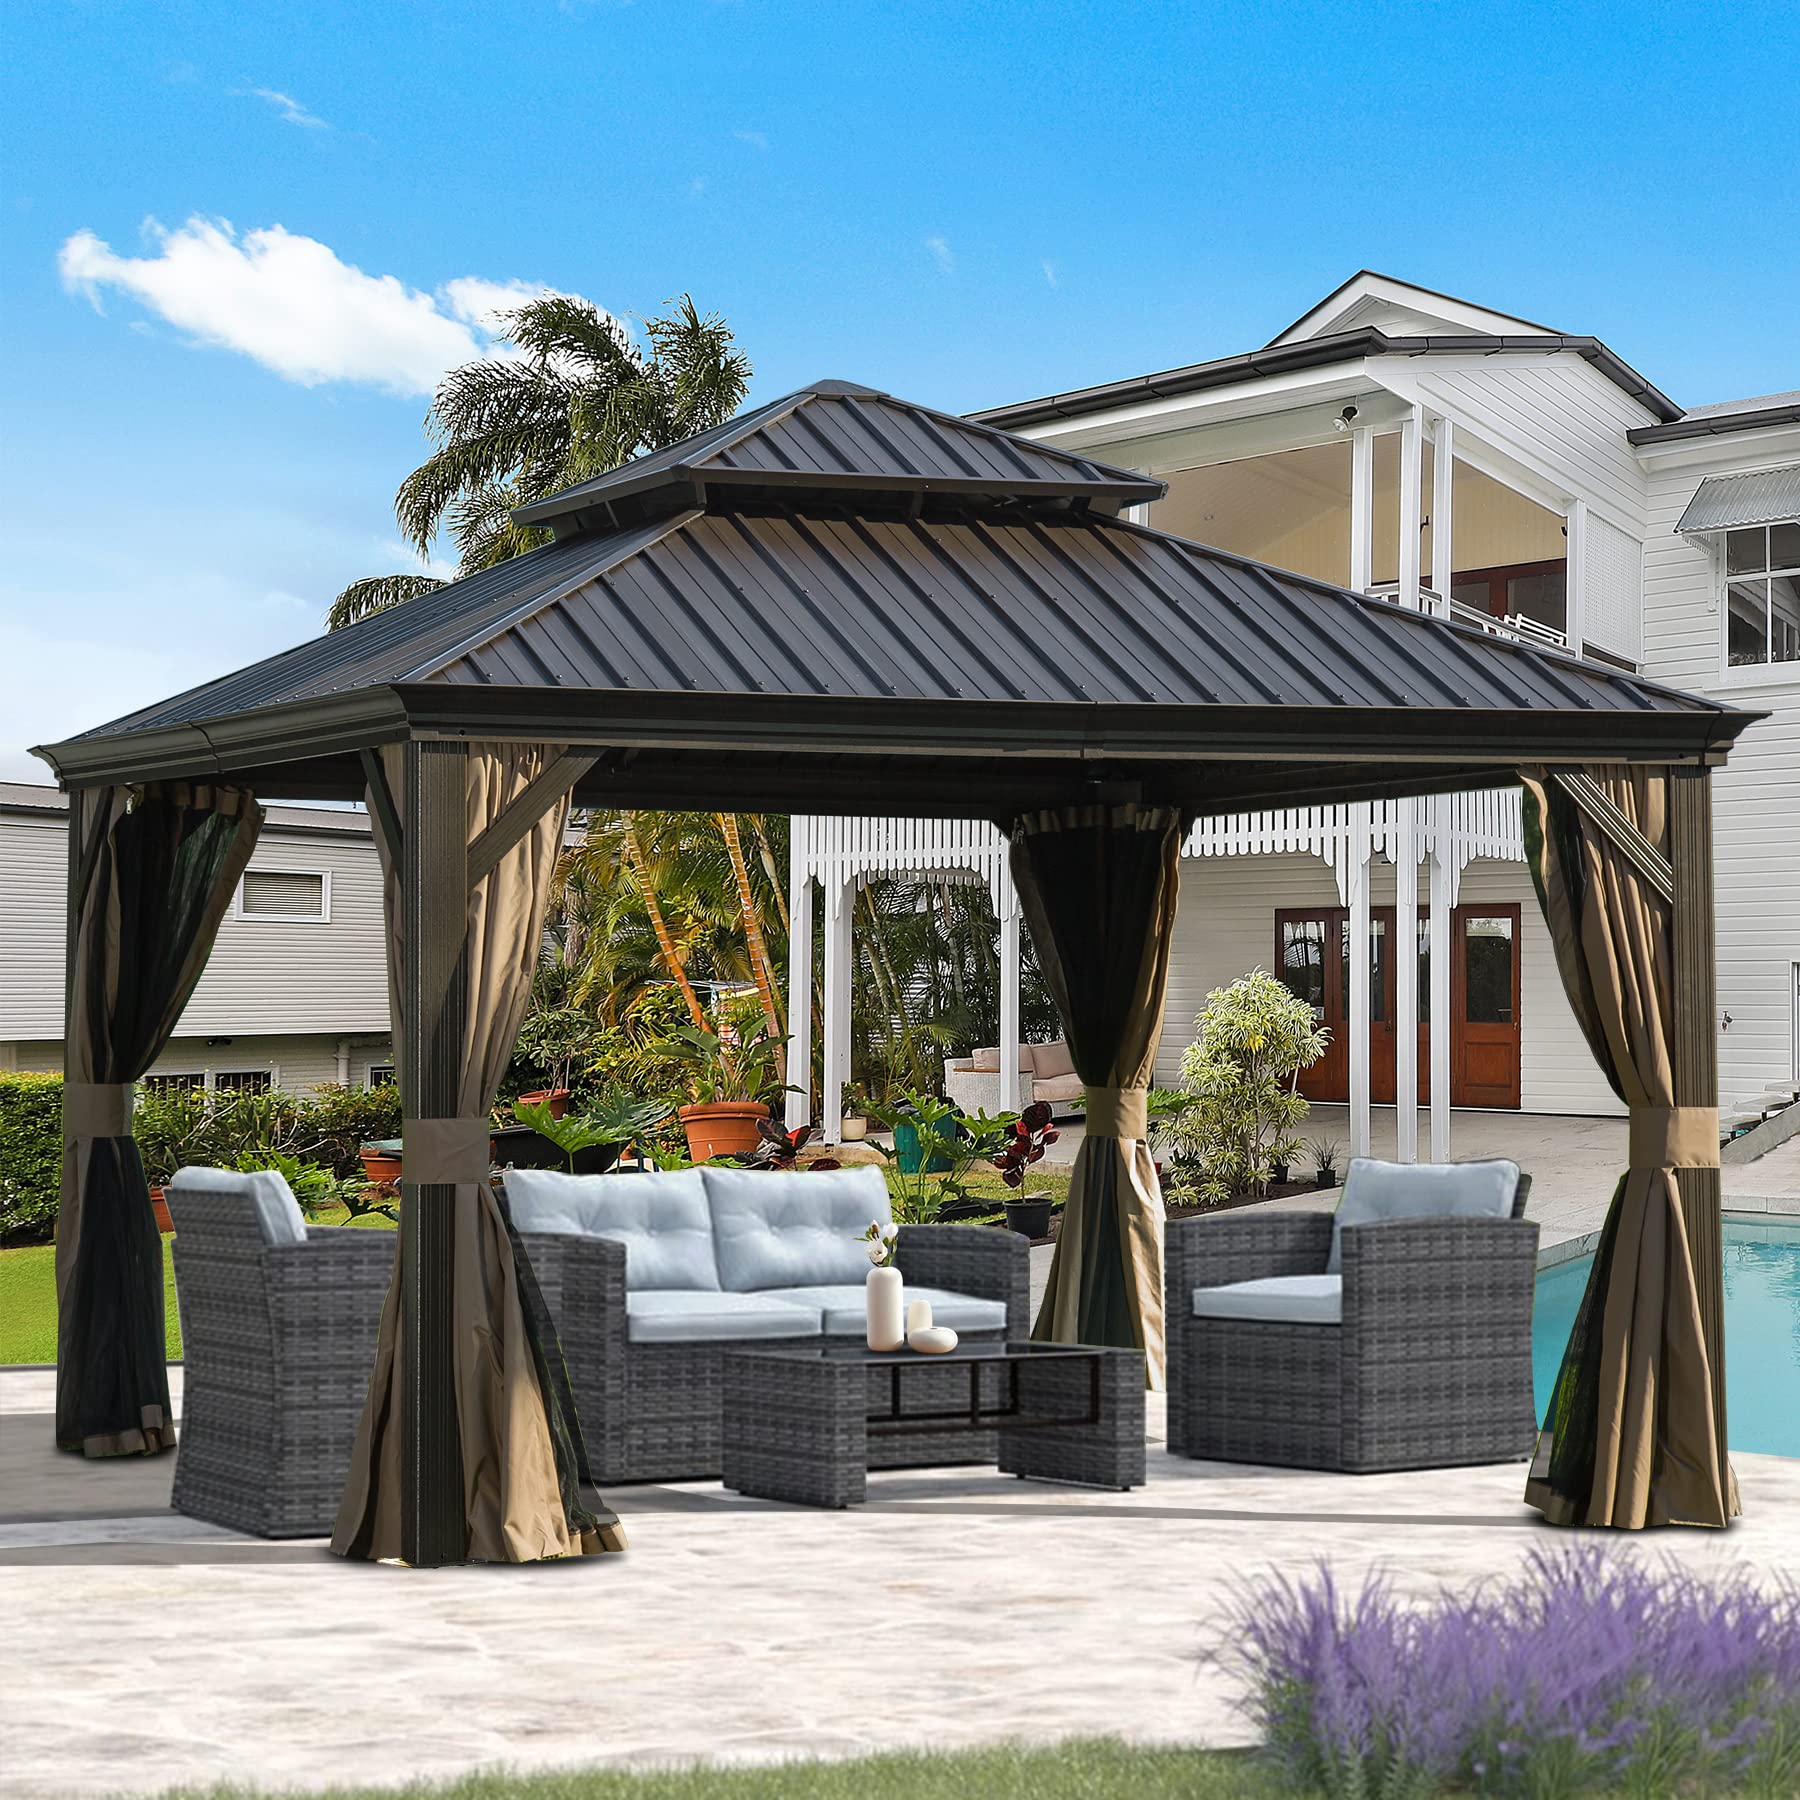 Domi Outdoor Living 12’ X 12’ Hardtop Gazebo, Outdoor Aluminum Frame Canopy with Galvanized Steel Double Roof, Outdoor Permanent Metal Pavilion with Curtains and Netting for Patio, Backyard and Lawn